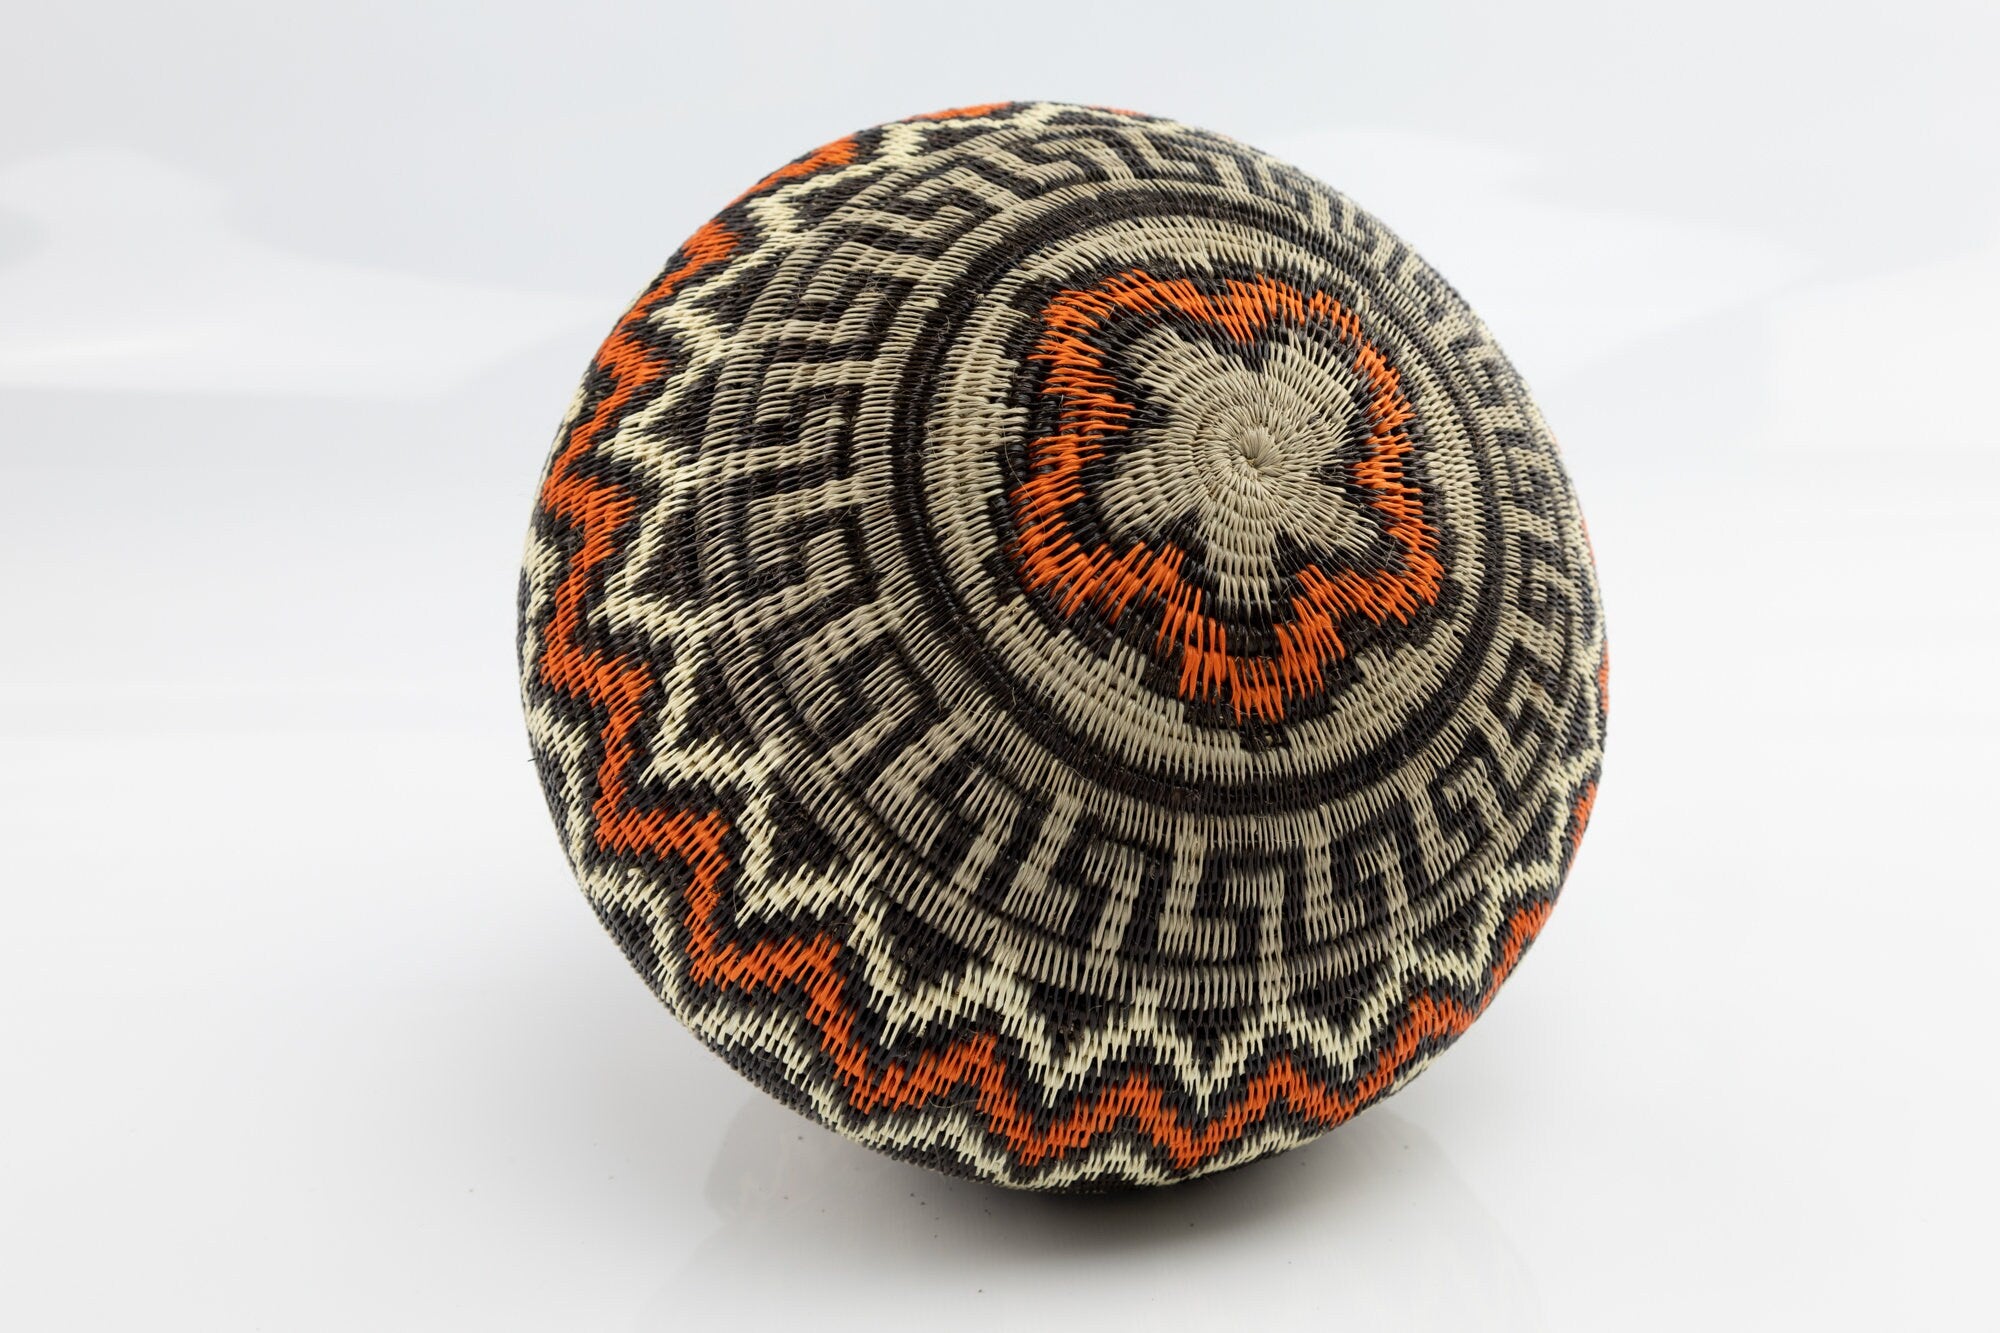 Hand Woven Classic Design Basket Made By Wounaan And Emberá Panama Indians. Bowl Basket, Woven Basket, Basket Decor, Woven Storage